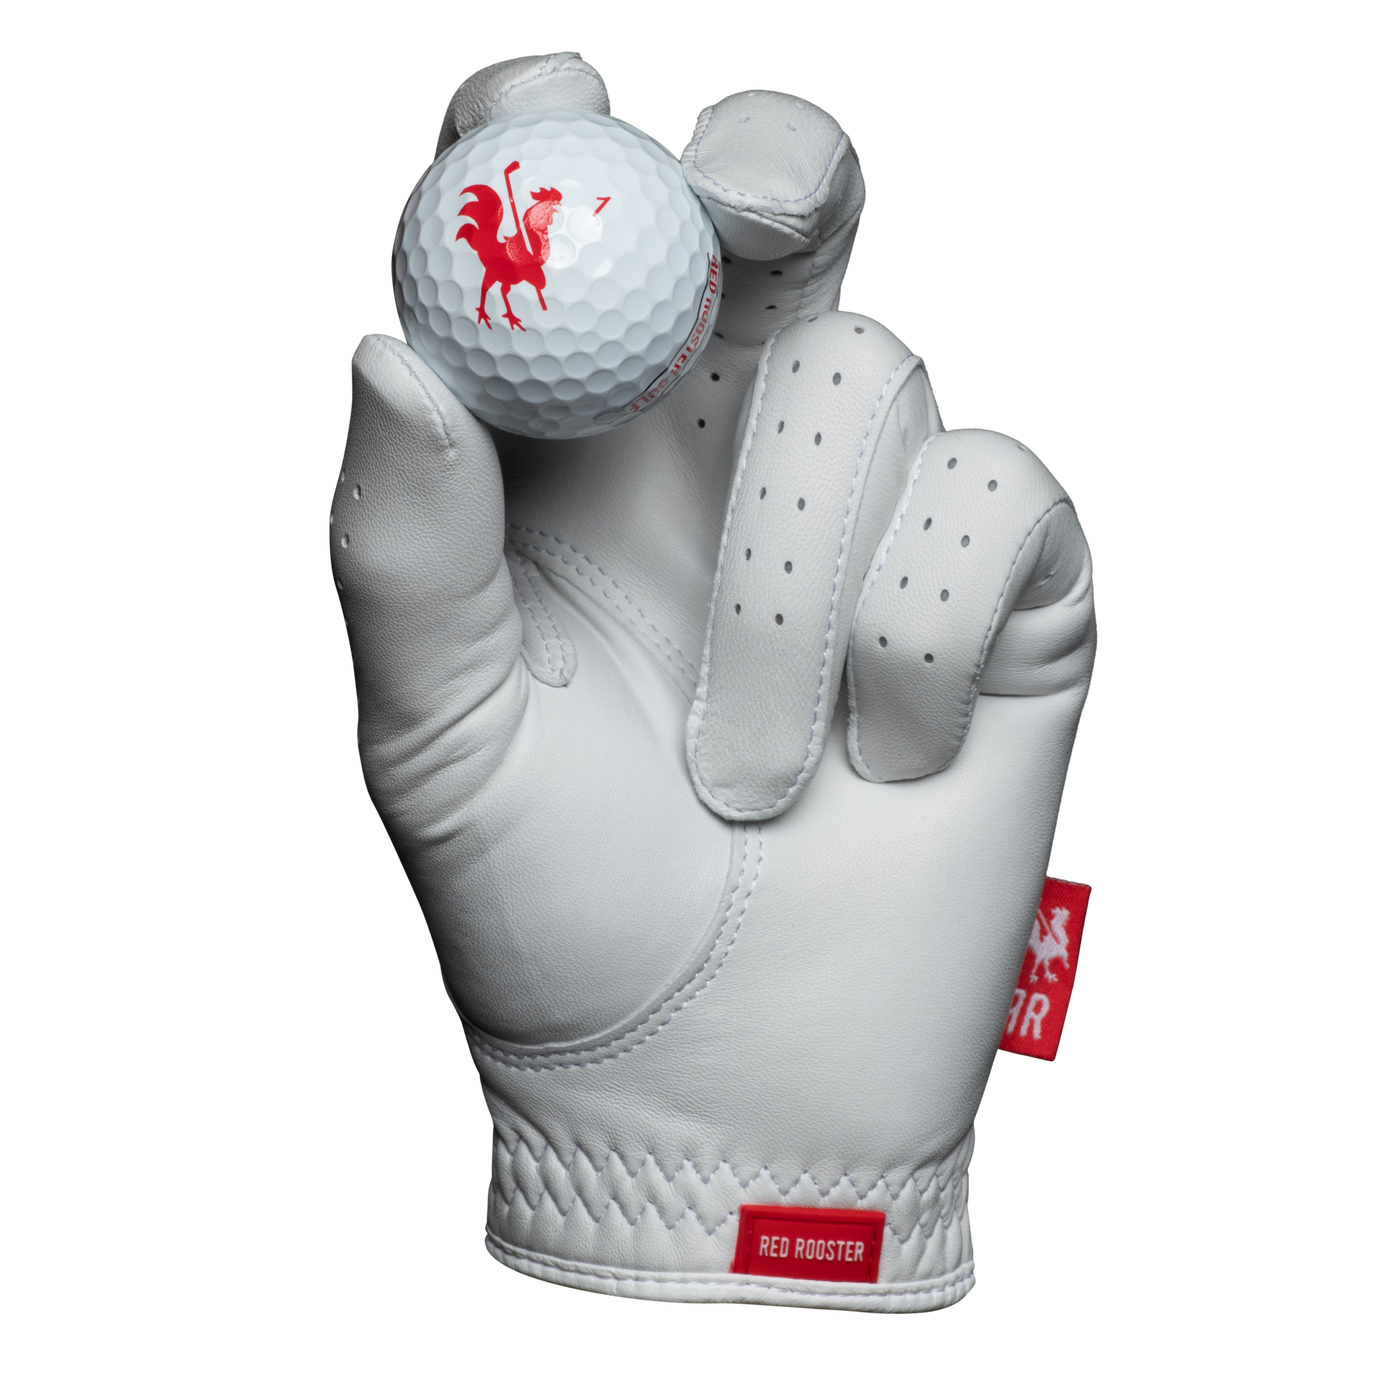 The Feather golf glove holding golf ball